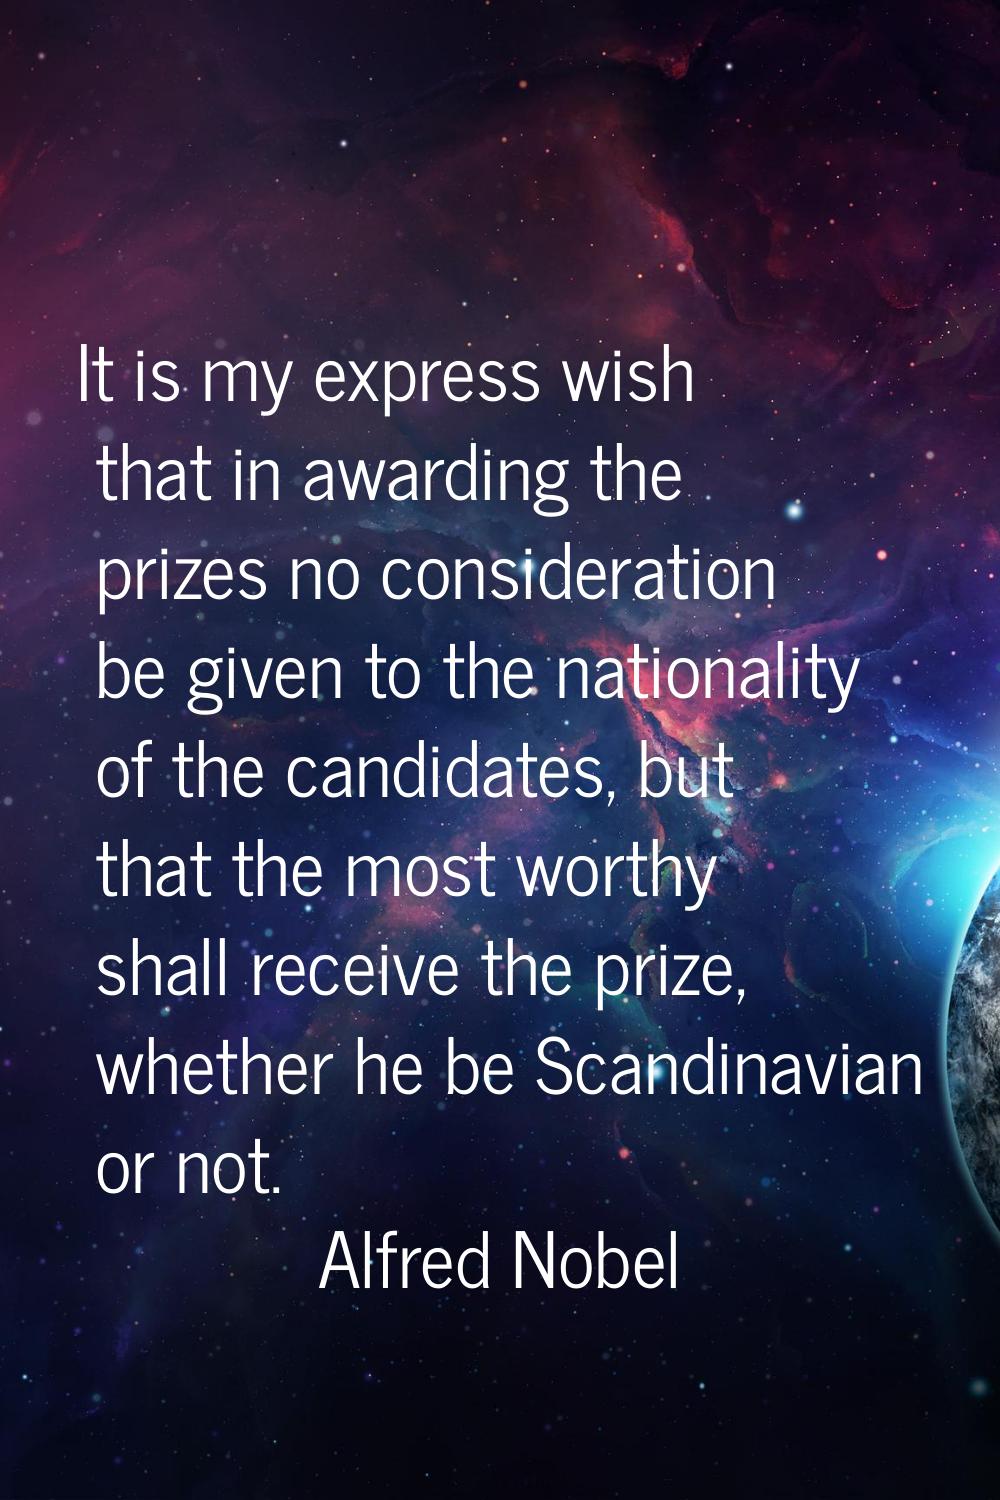 It is my express wish that in awarding the prizes no consideration be given to the nationality of t